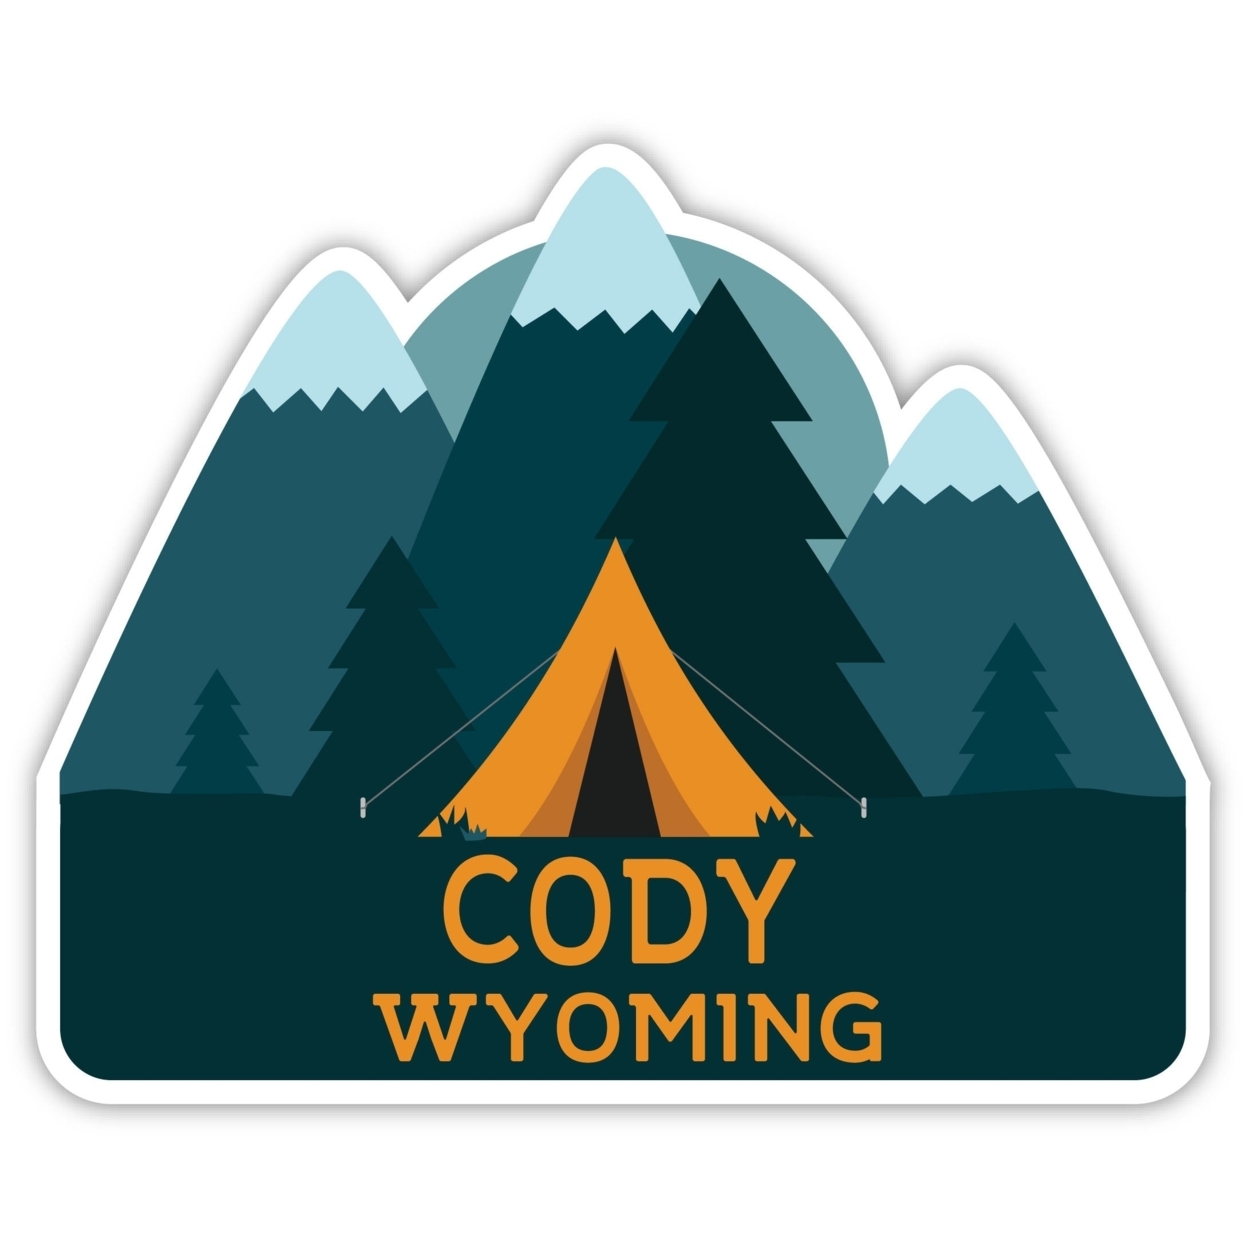 Cody Wyoming Souvenir Decorative Stickers (Choose Theme And Size) - 4-Pack, 4-Inch, Camp Life